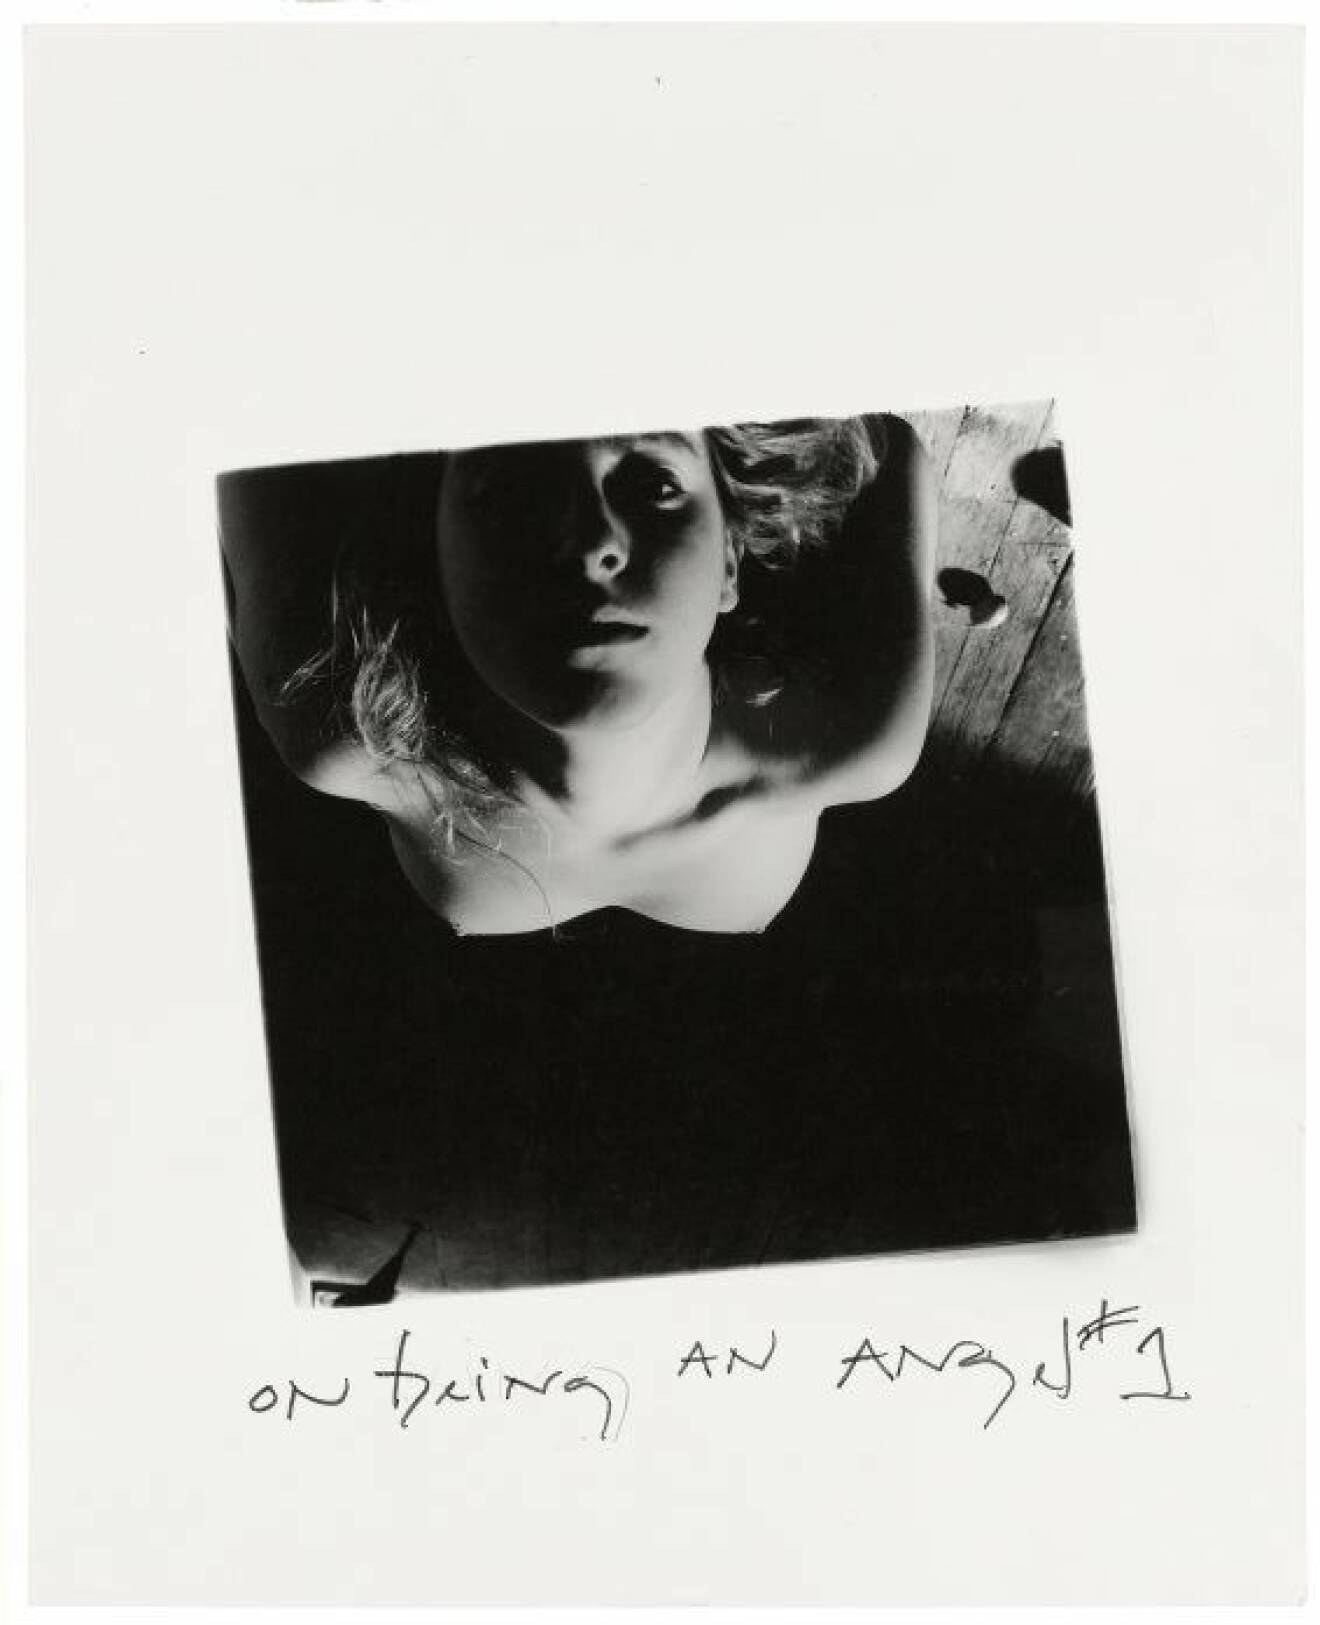 Francesca Woodman, On Being an Angel # 1, 1977 © Betty and George Woodman NB: No toning, cropping, enlarging, or overprinting with text allowed.